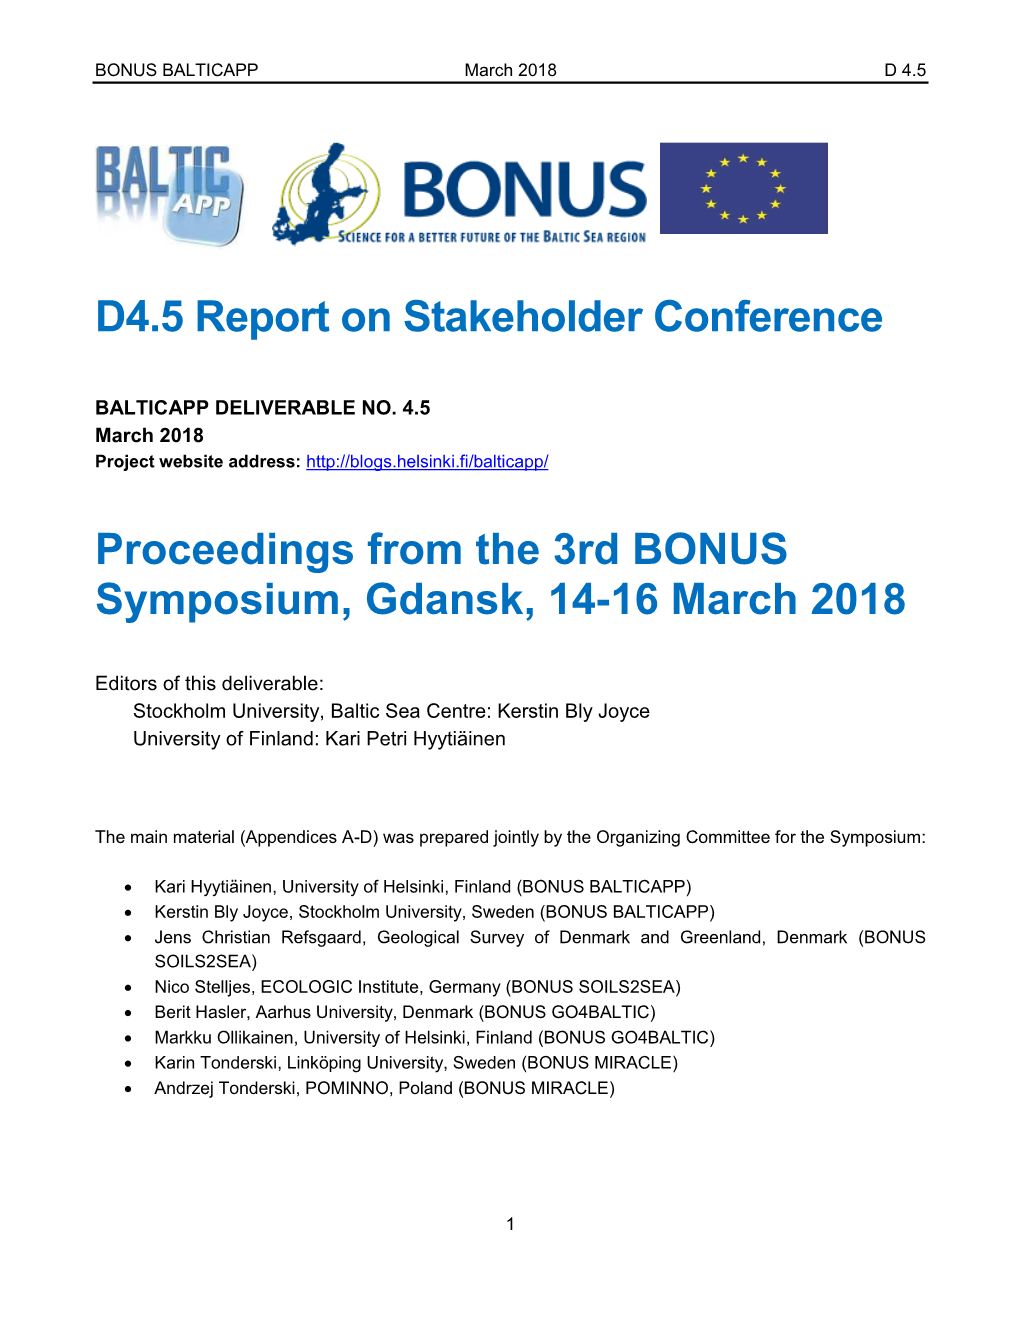 D4.5 Report on Stakeholder Conference Proceedings from the 3Rd BONUS Symposium, Gdansk, 14-16 March 2018